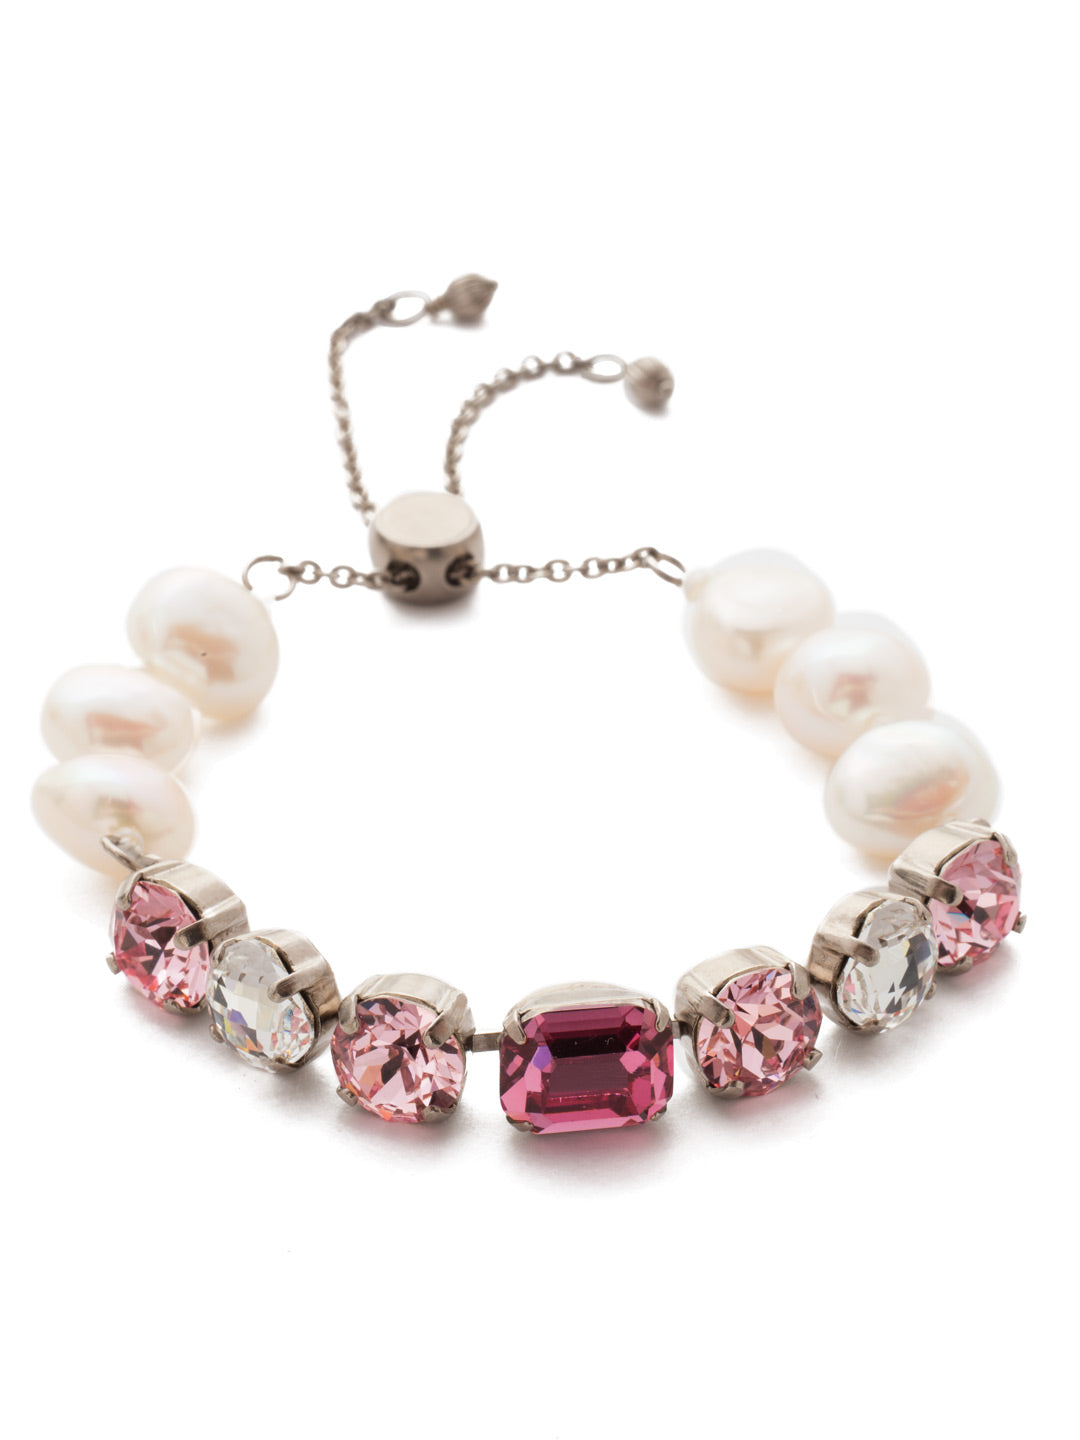 Cadenza Slider Bracelet - BEC14ASMP - <p>A classic line bracelet reimagined with a adjustable slider clasp. A pattern of crystals and pearls give this bracelet all around allure. From Sorrelli's Misty Pink collection in our Antique Silver-tone finish.</p>